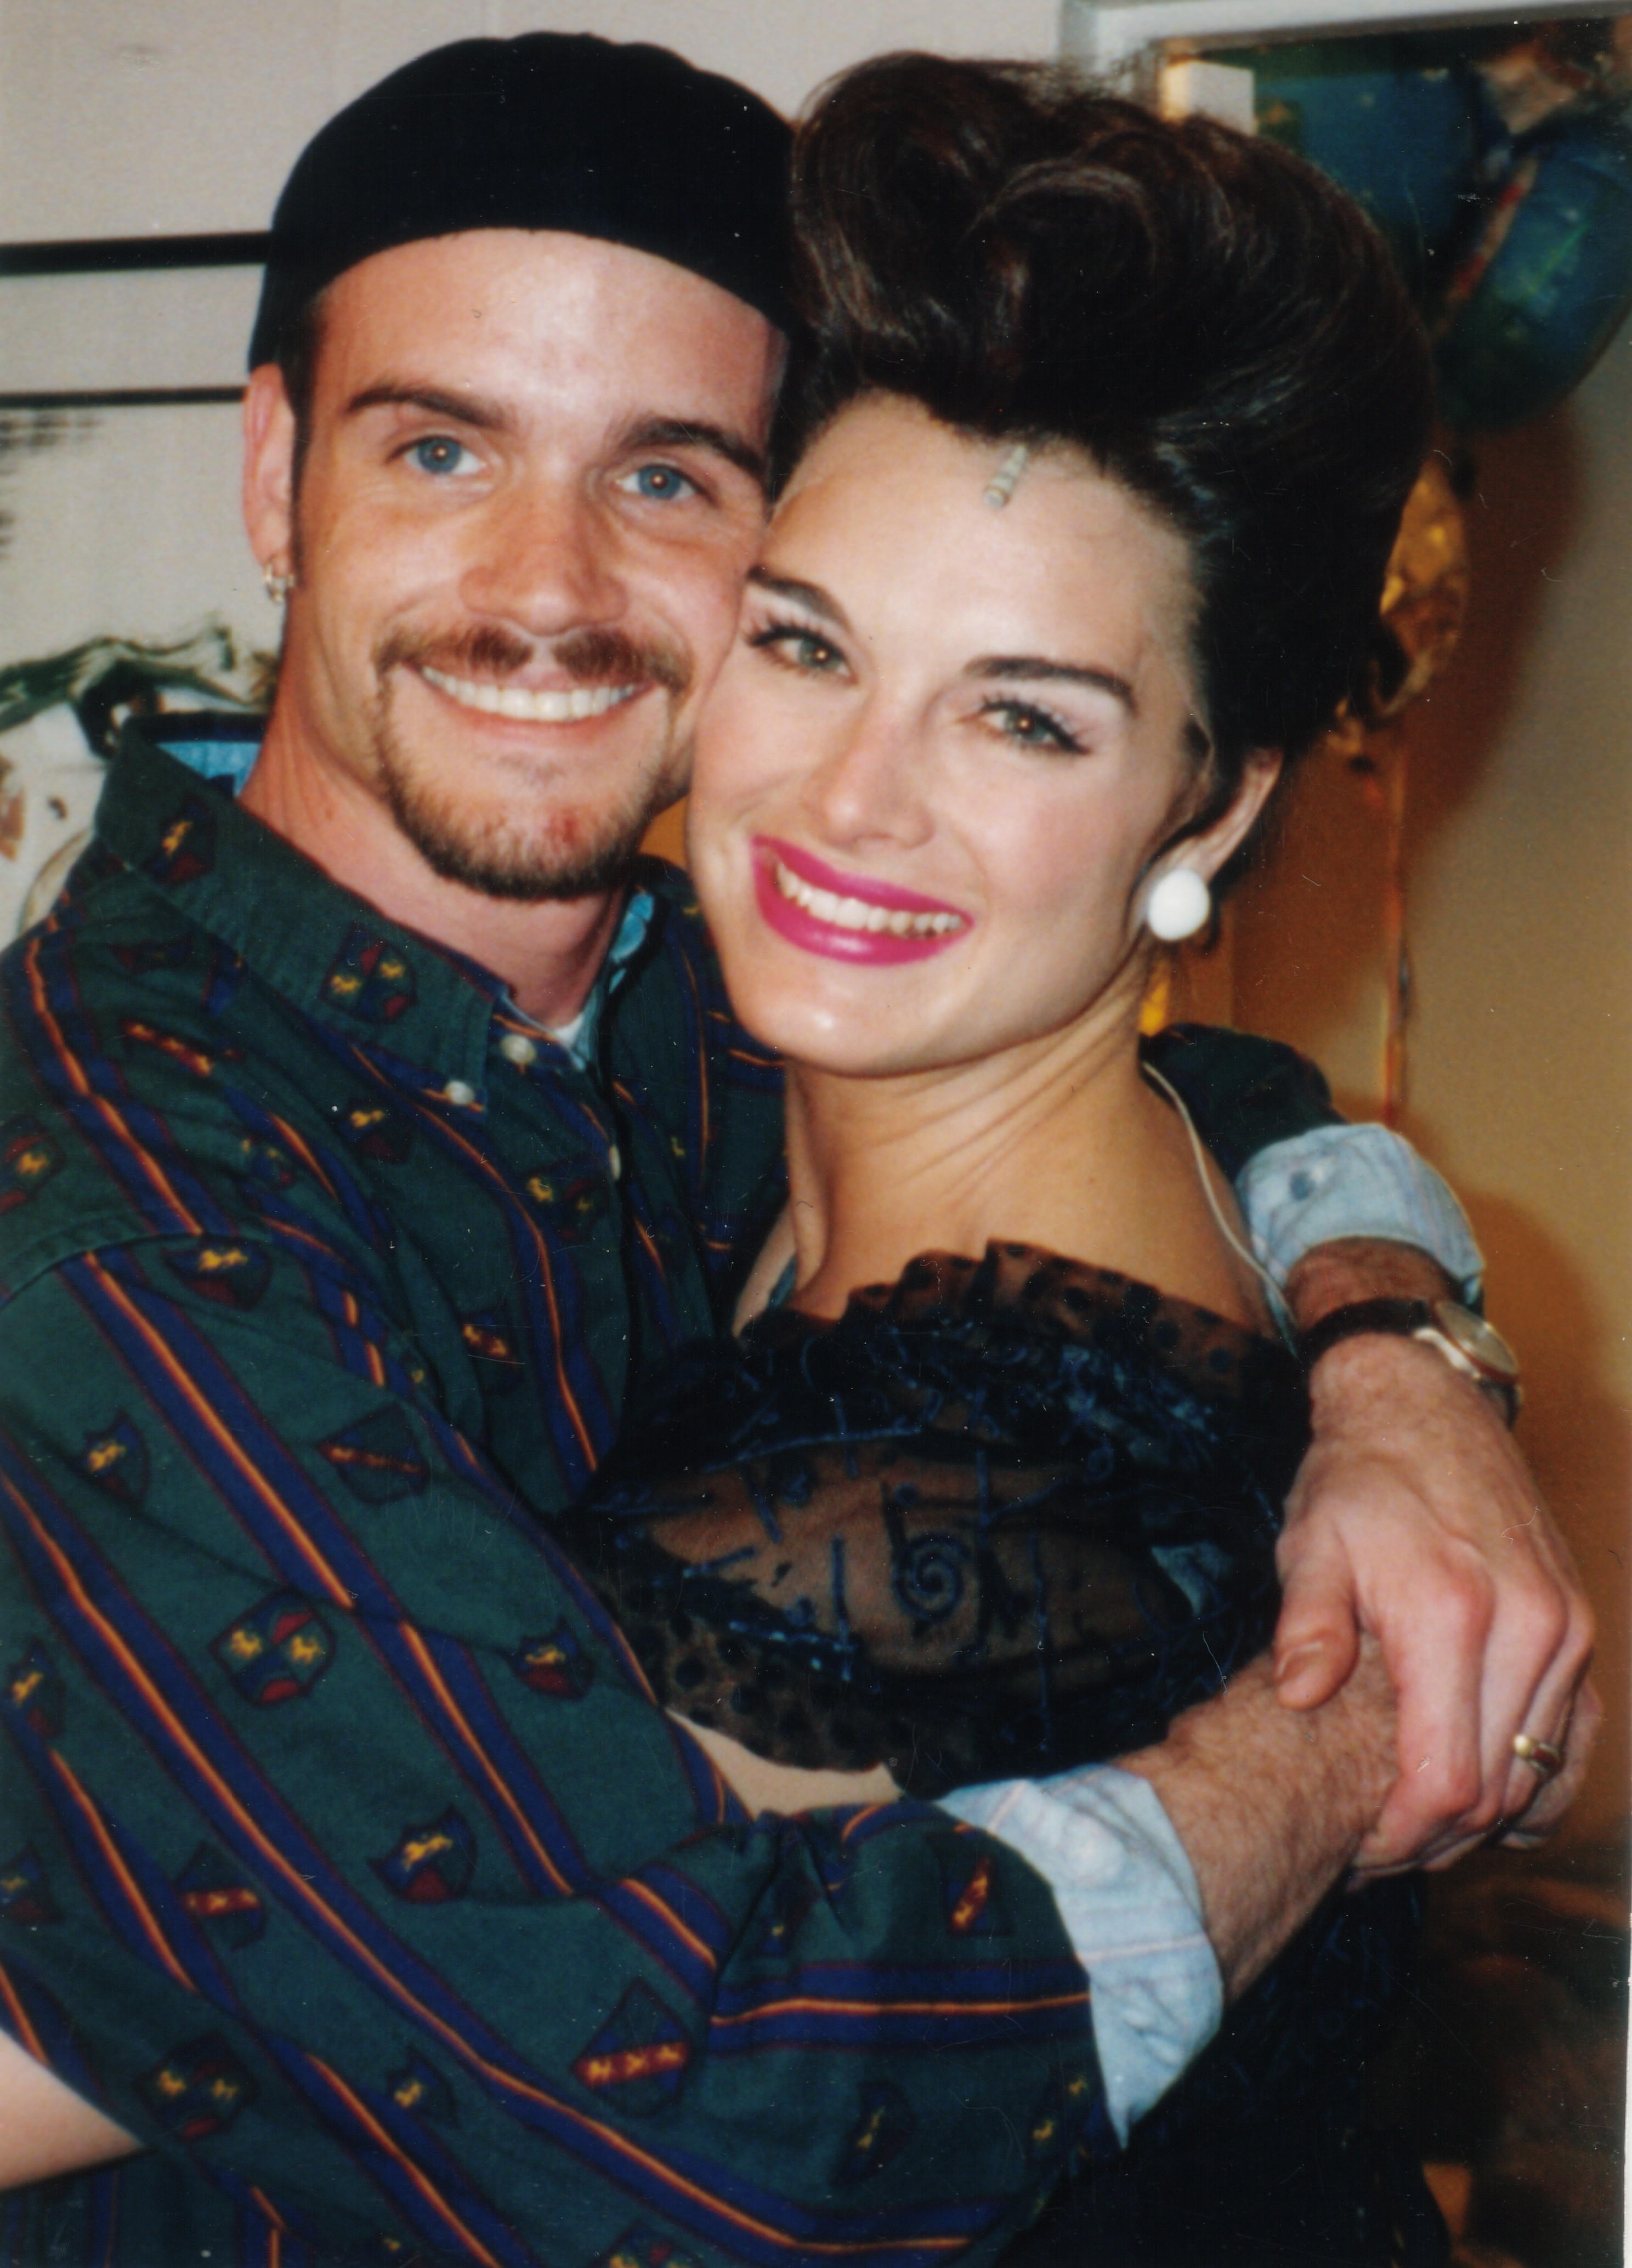 Kent Nelson and Brooke Shields as 